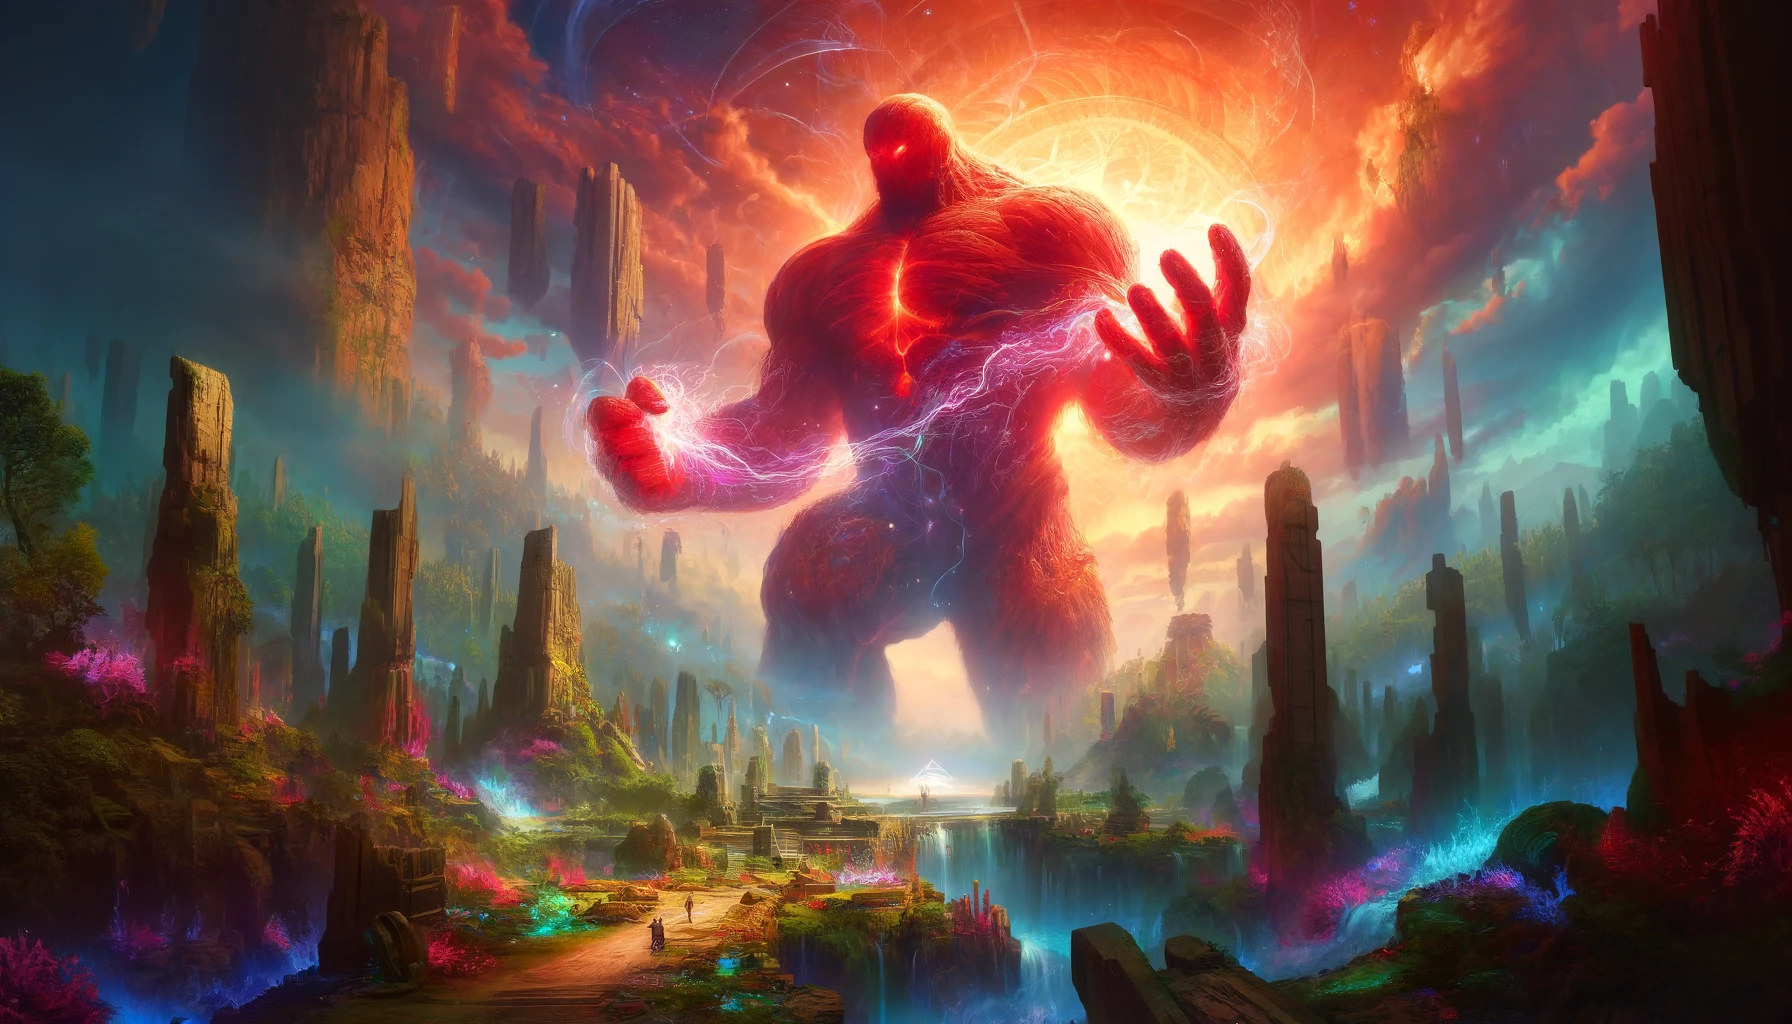 A colossal red energy figure towers over an ancient, mystical landscape under a vibrant sky.